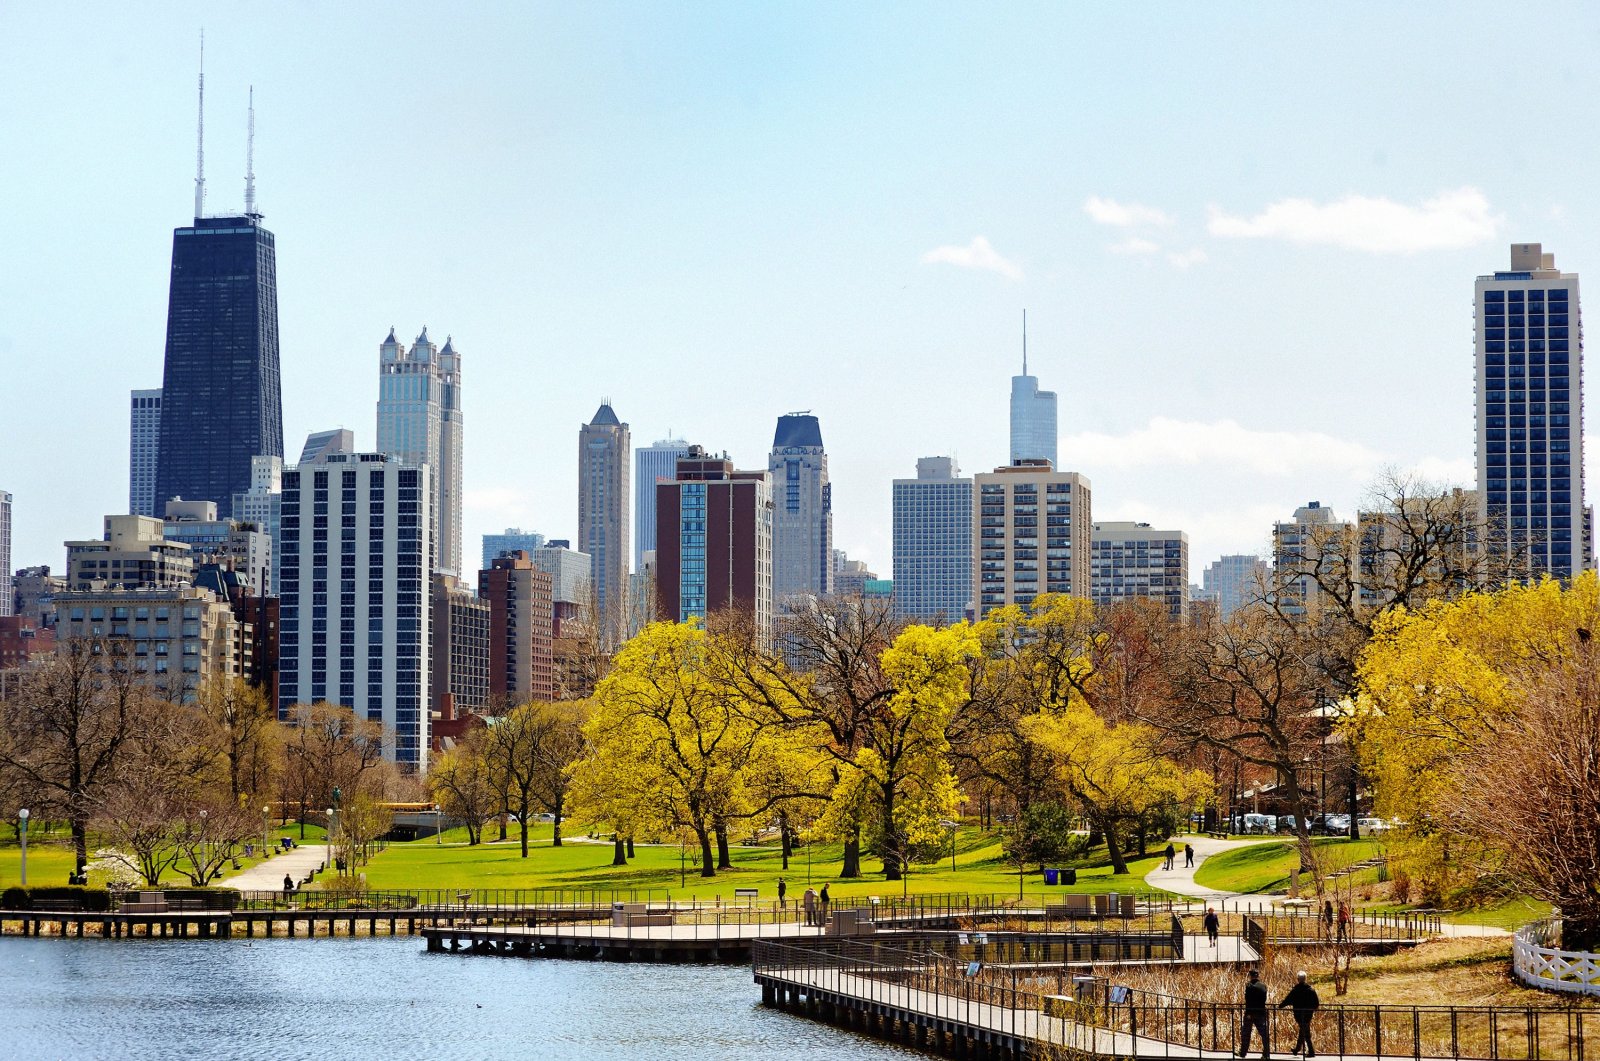 Chicago skyline with skyscrapers viewed from Lincoln Park over lake in this undated file photo. (Shutterstock Photo)